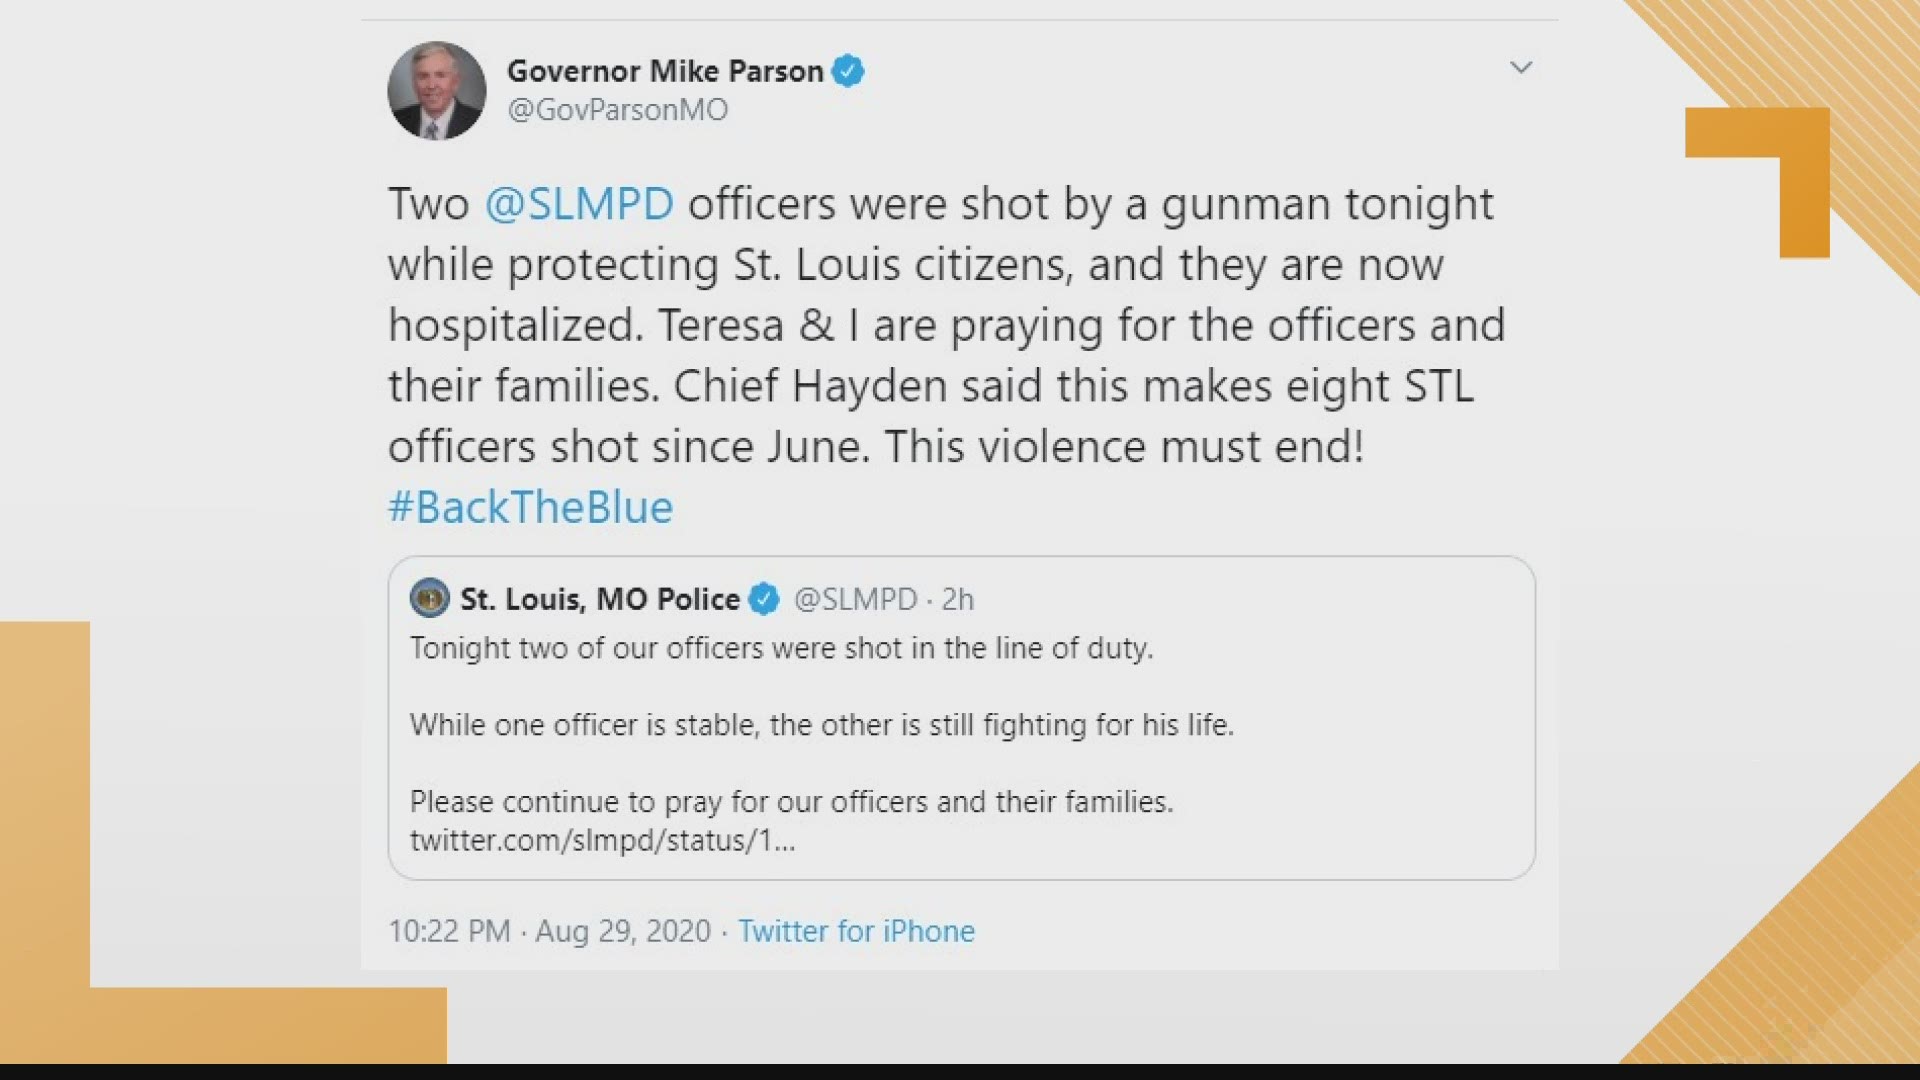 'This violence must end,' Gov. Parson said in part in a tweet